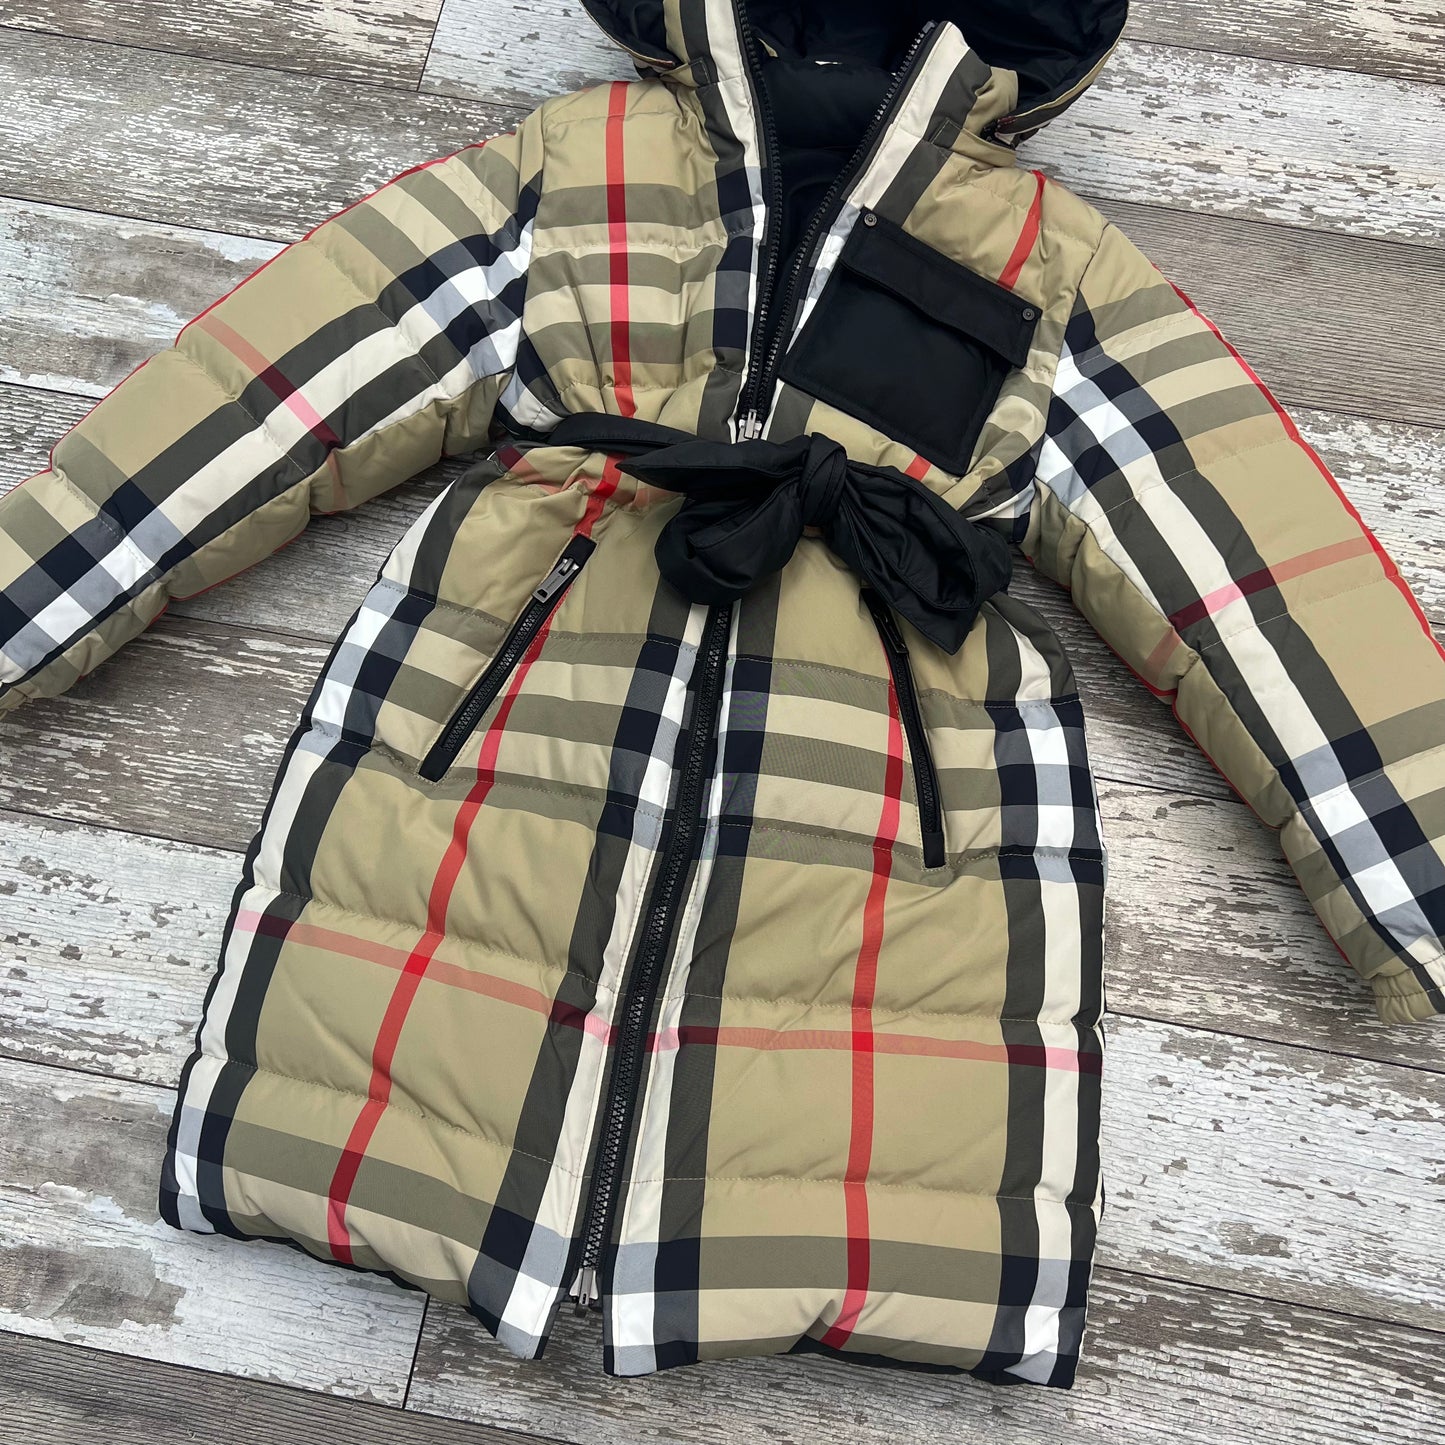 Burberry Kids Reversible Coat, 8 Youth